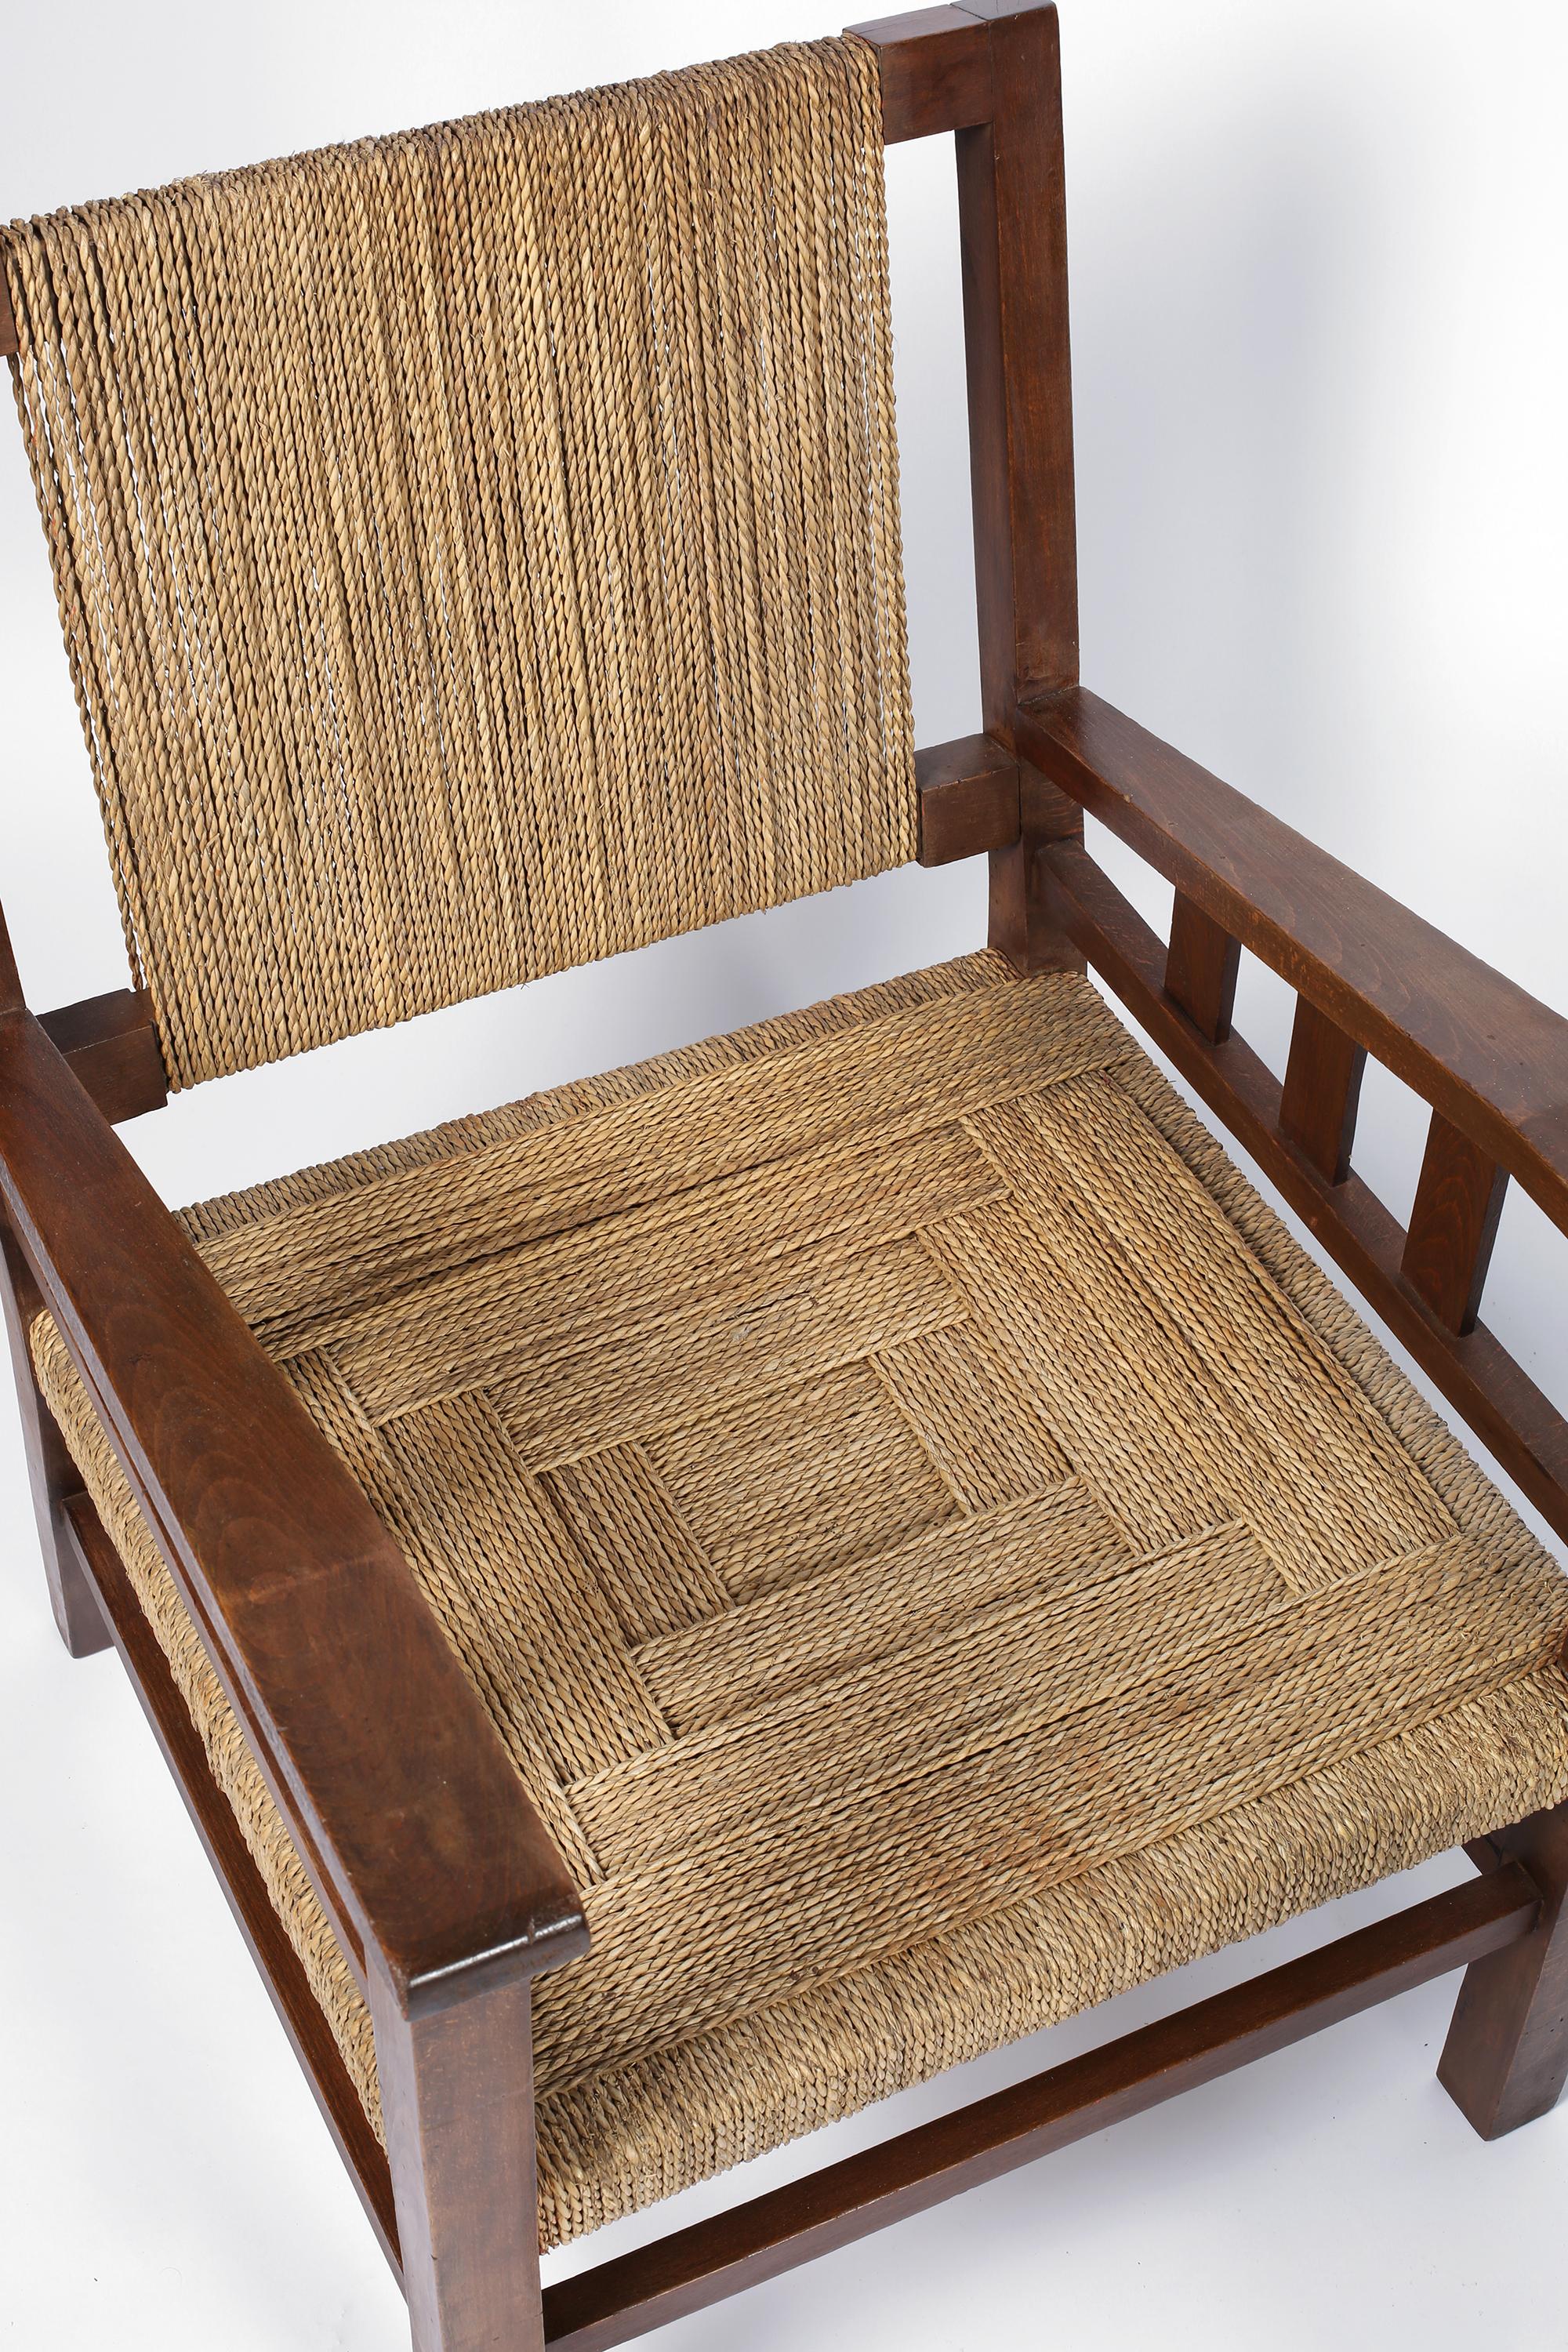 Pair of Francis Jourdain Armchairs in Beech and Seagrass, French, circa 1930s 3